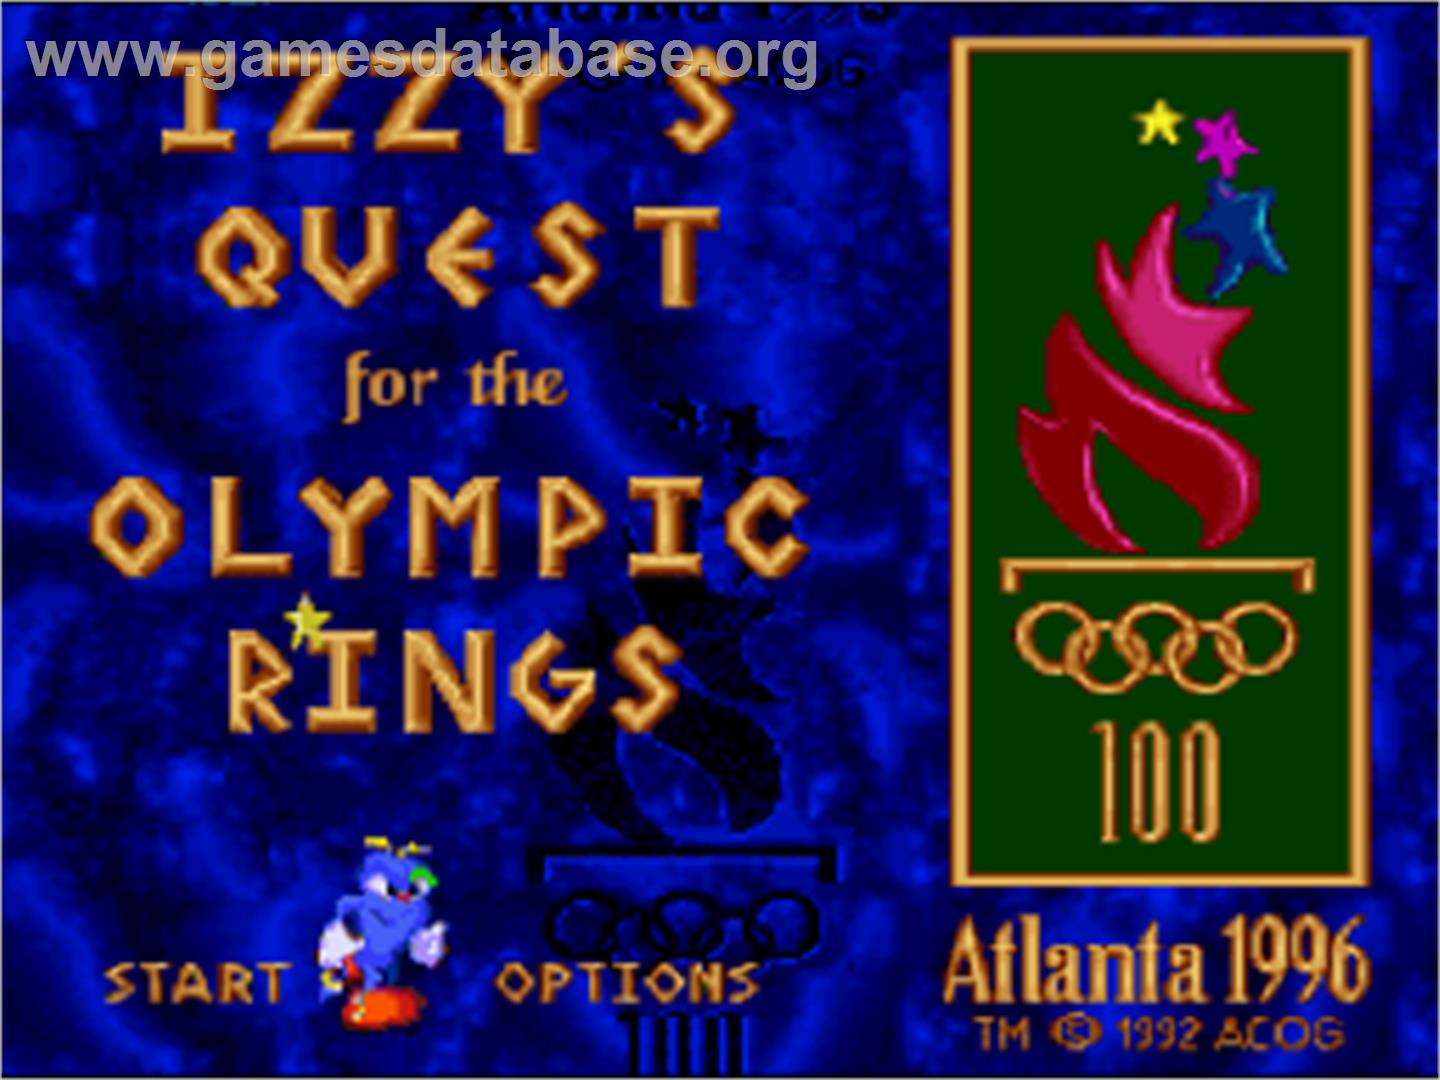 Izzy's Quest for the Olympic Rings - Nintendo SNES - Artwork - Title Screen